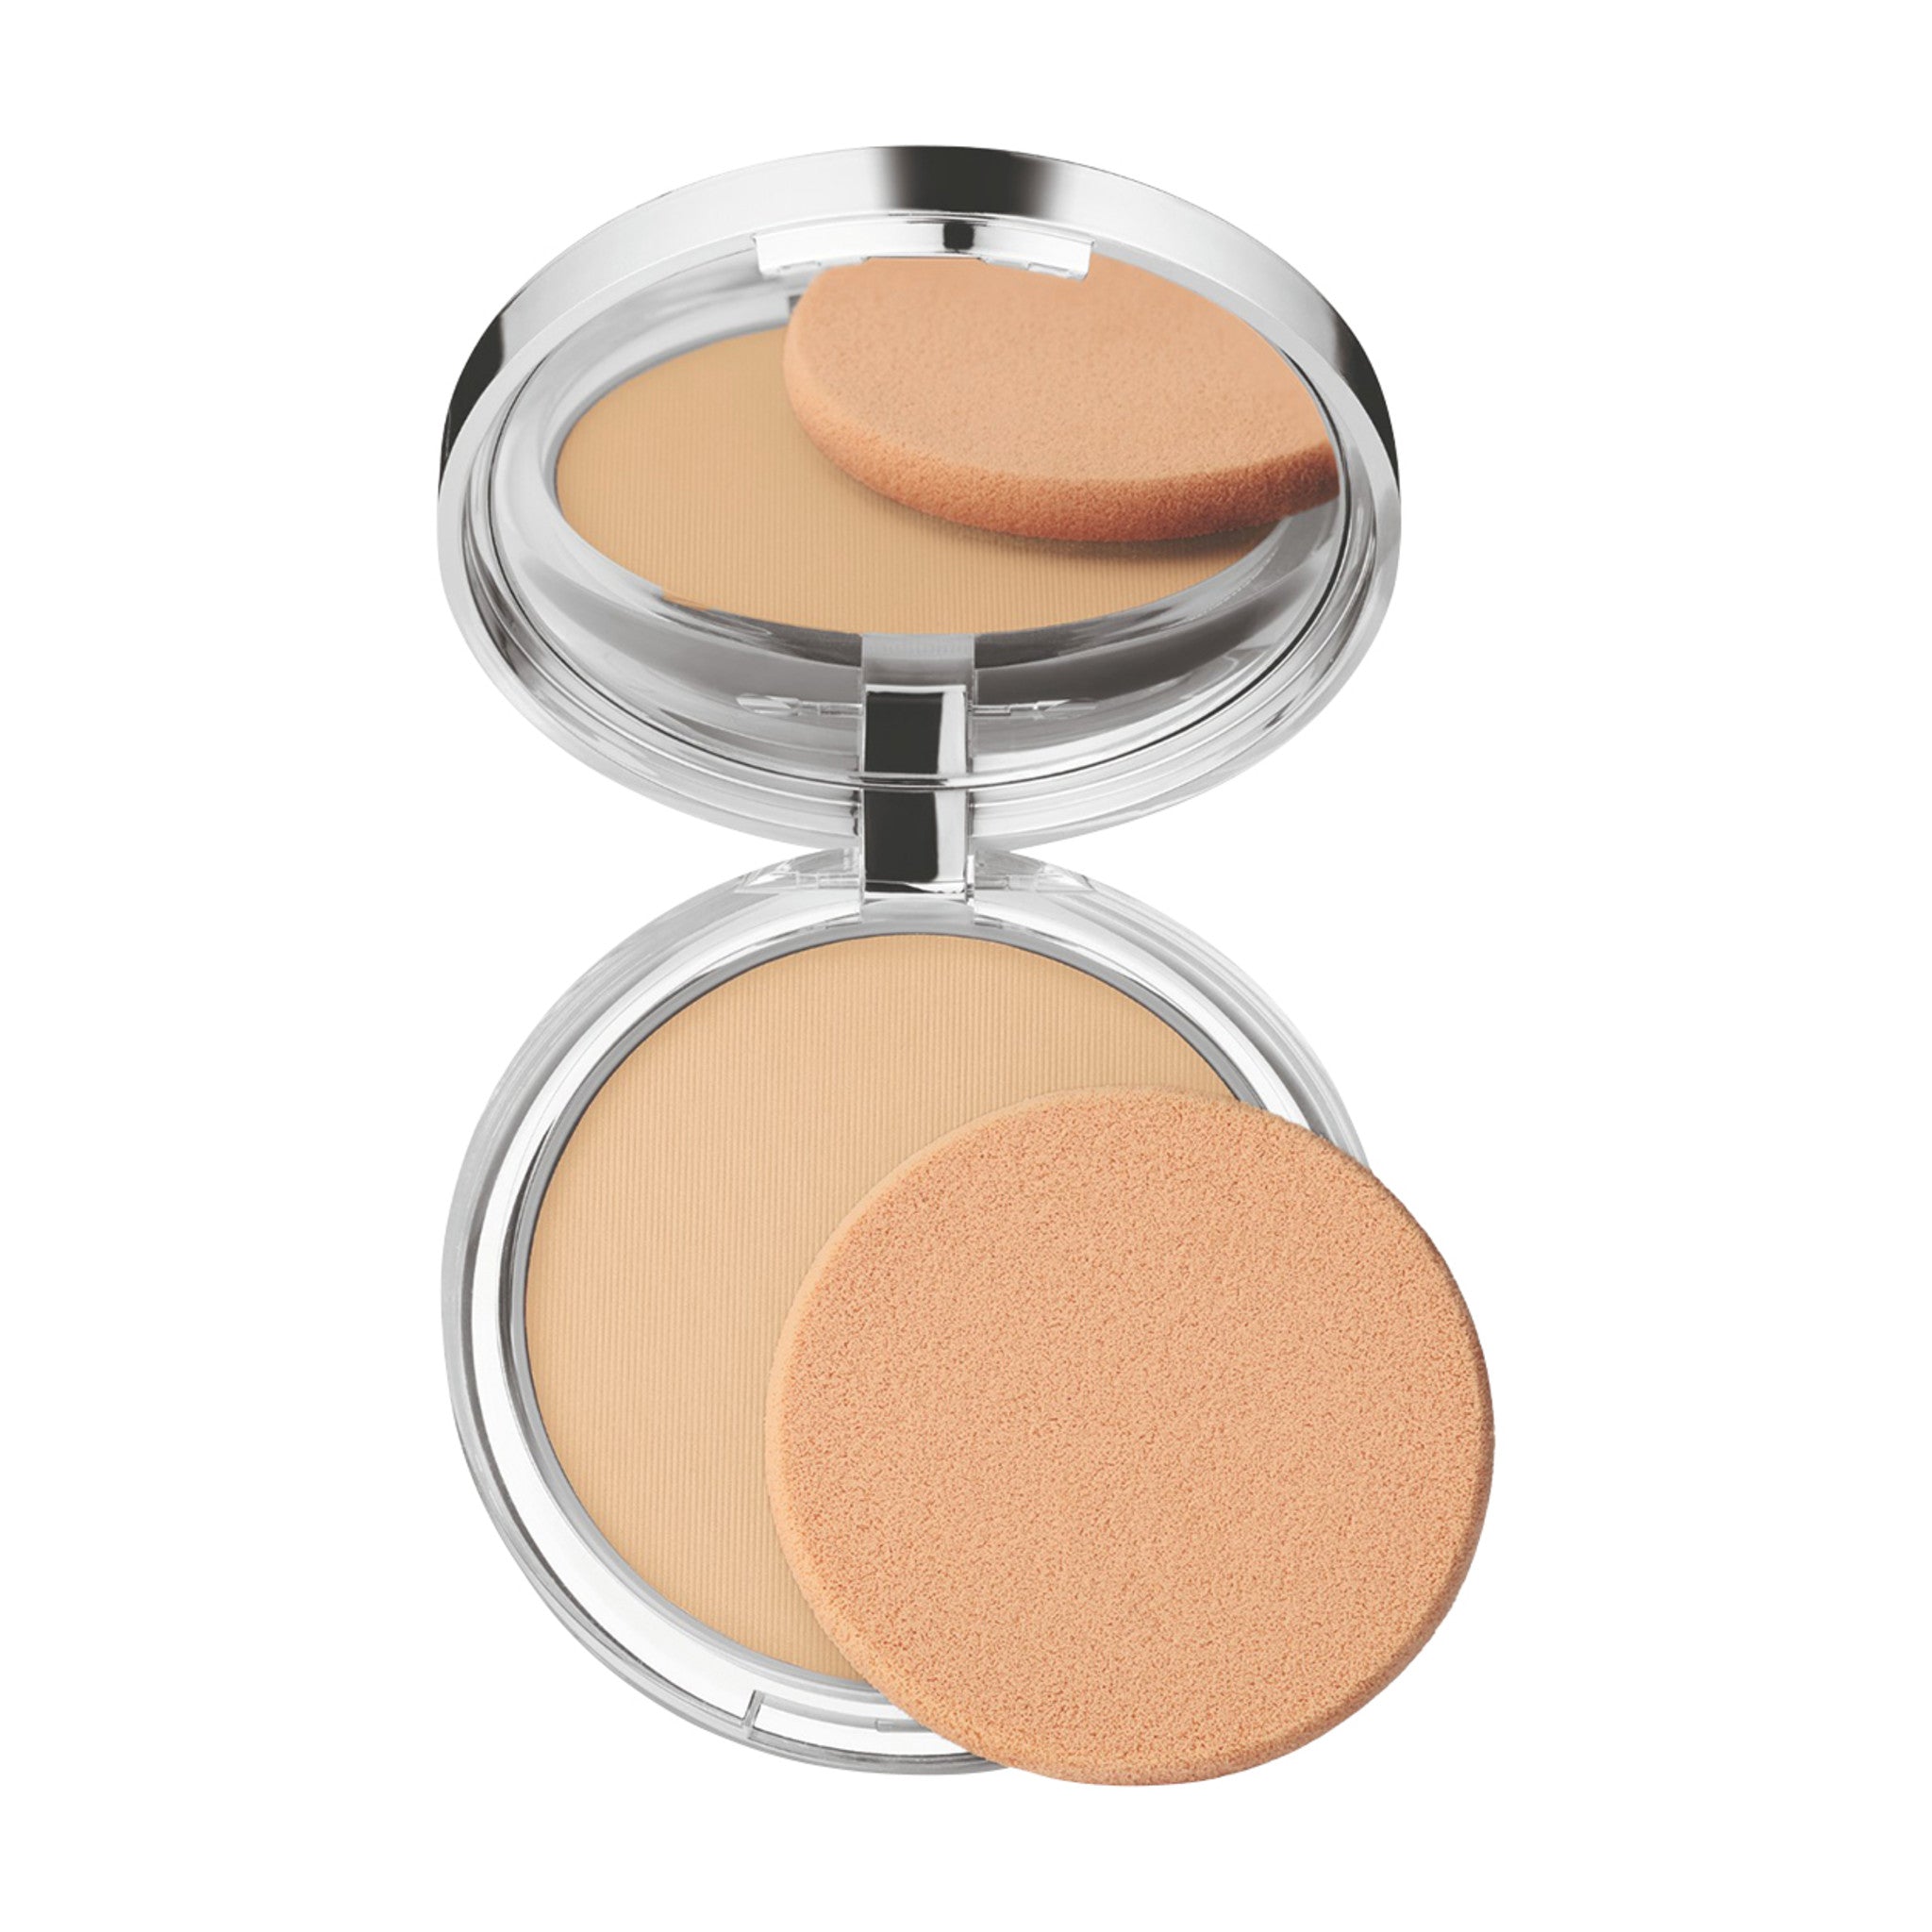 Clinique Stay Matte Sheer Pressed Powder Color/Shade variant: INVISIBLE MATTE main image.